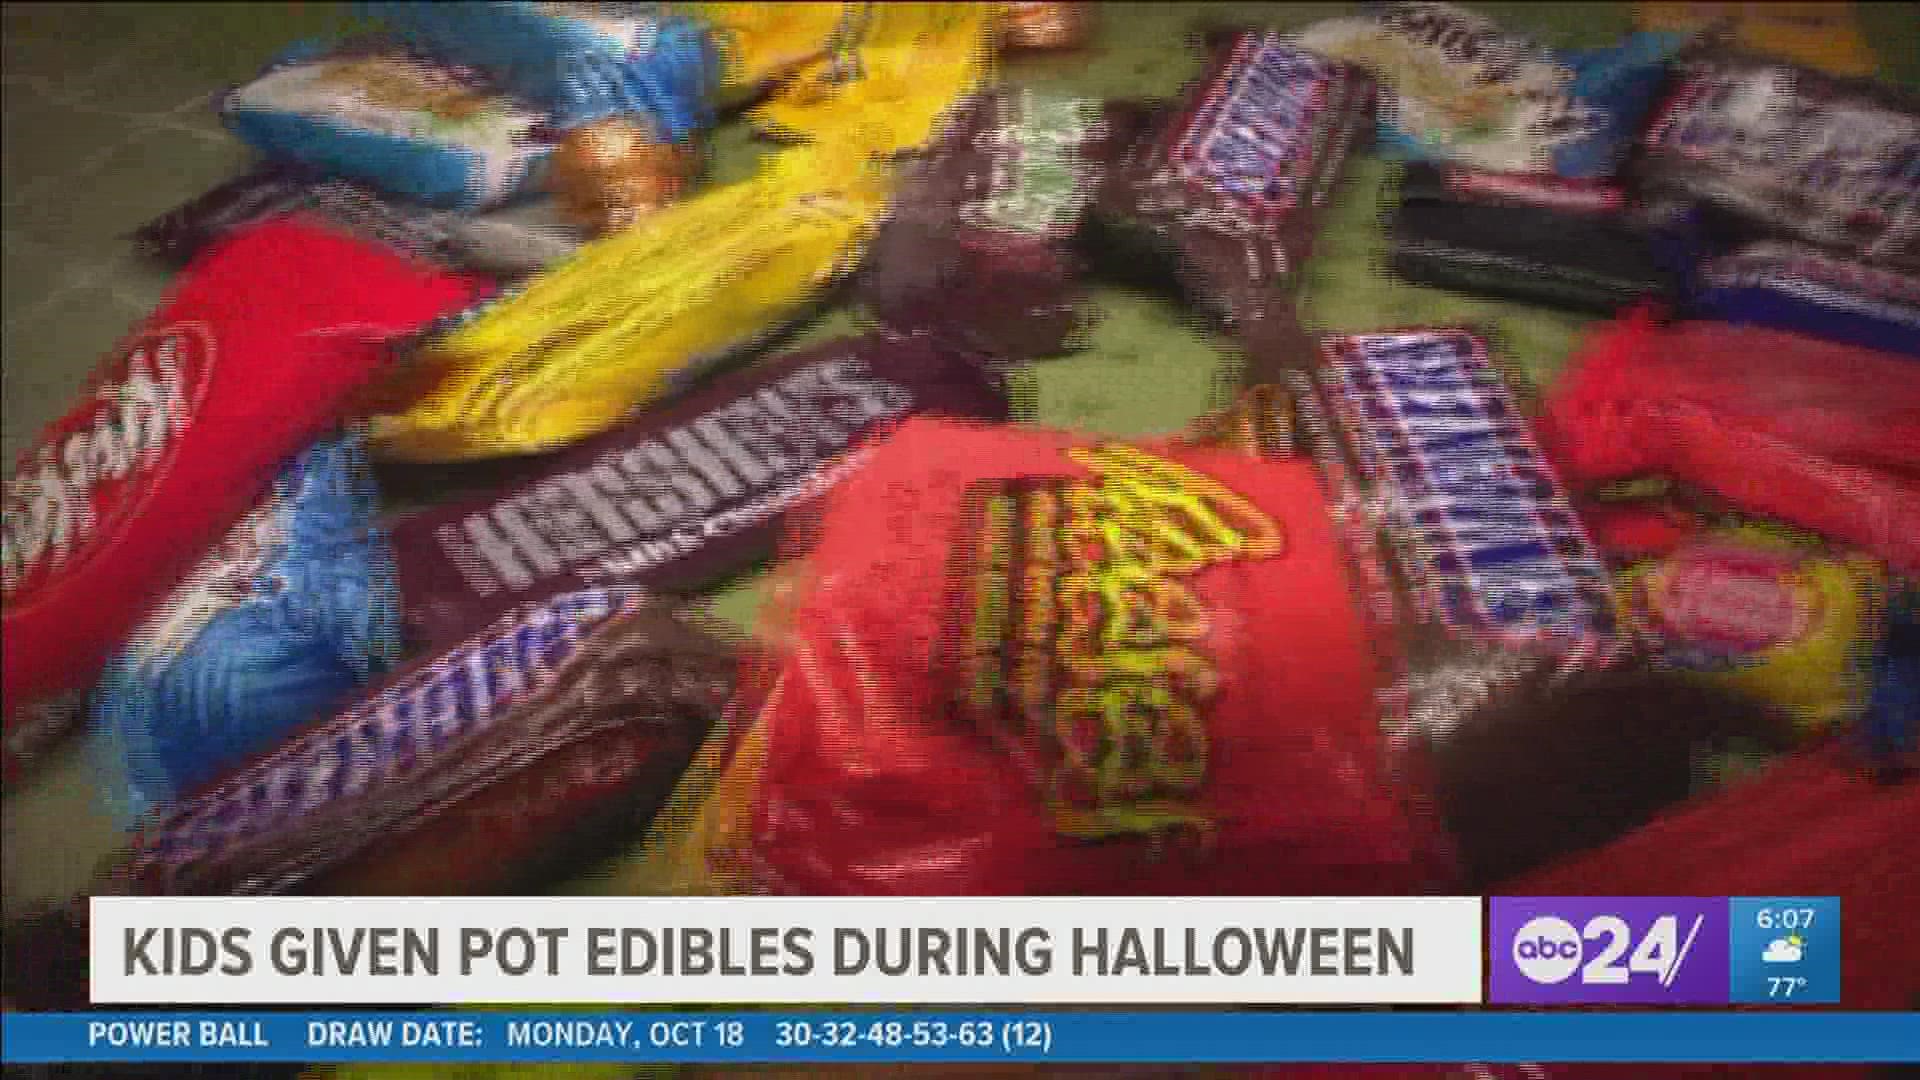 The Hernando Police Department made a post on Facebook warning parents to be aware of THC-infused candies in their child's Halloween sacks.